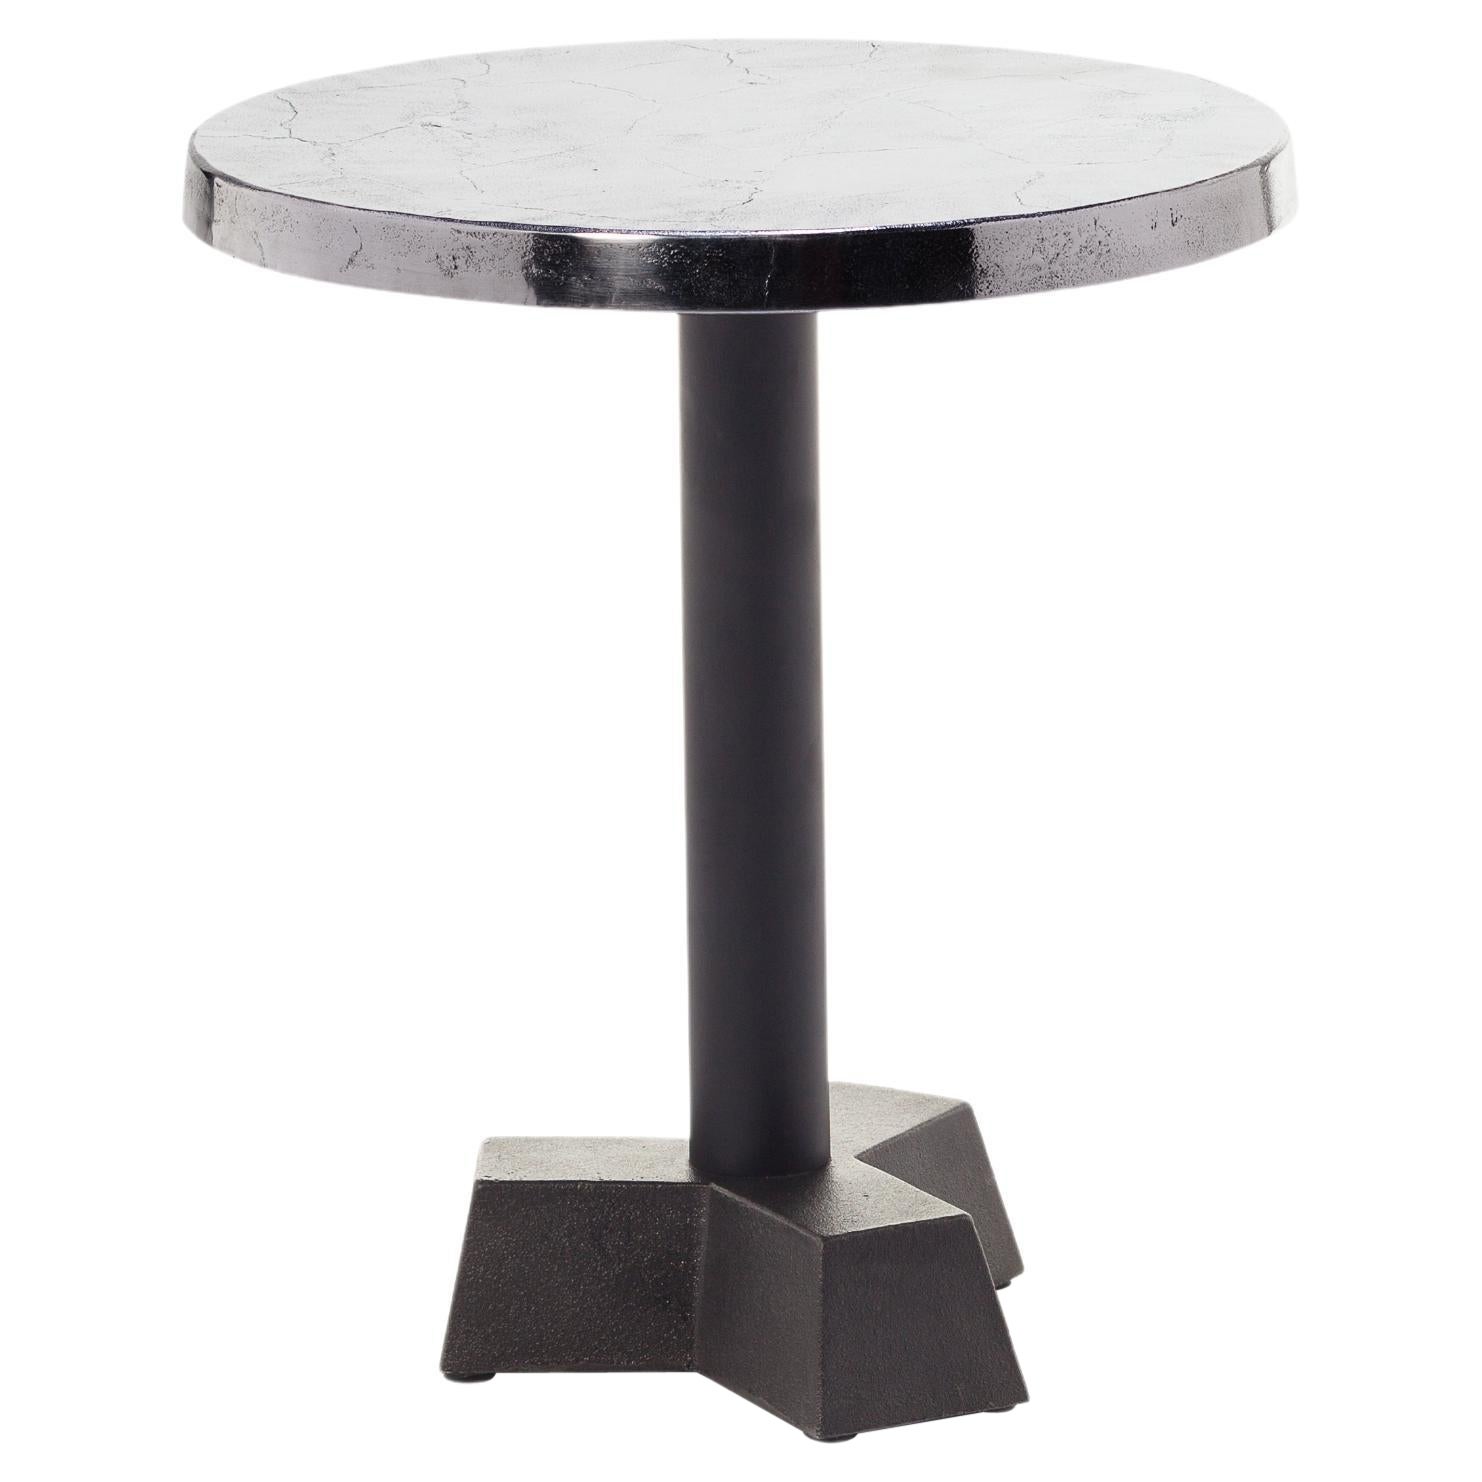 Gervasoni Small Brass Coffee Table in Cast Aluminium Top by Paola Navone